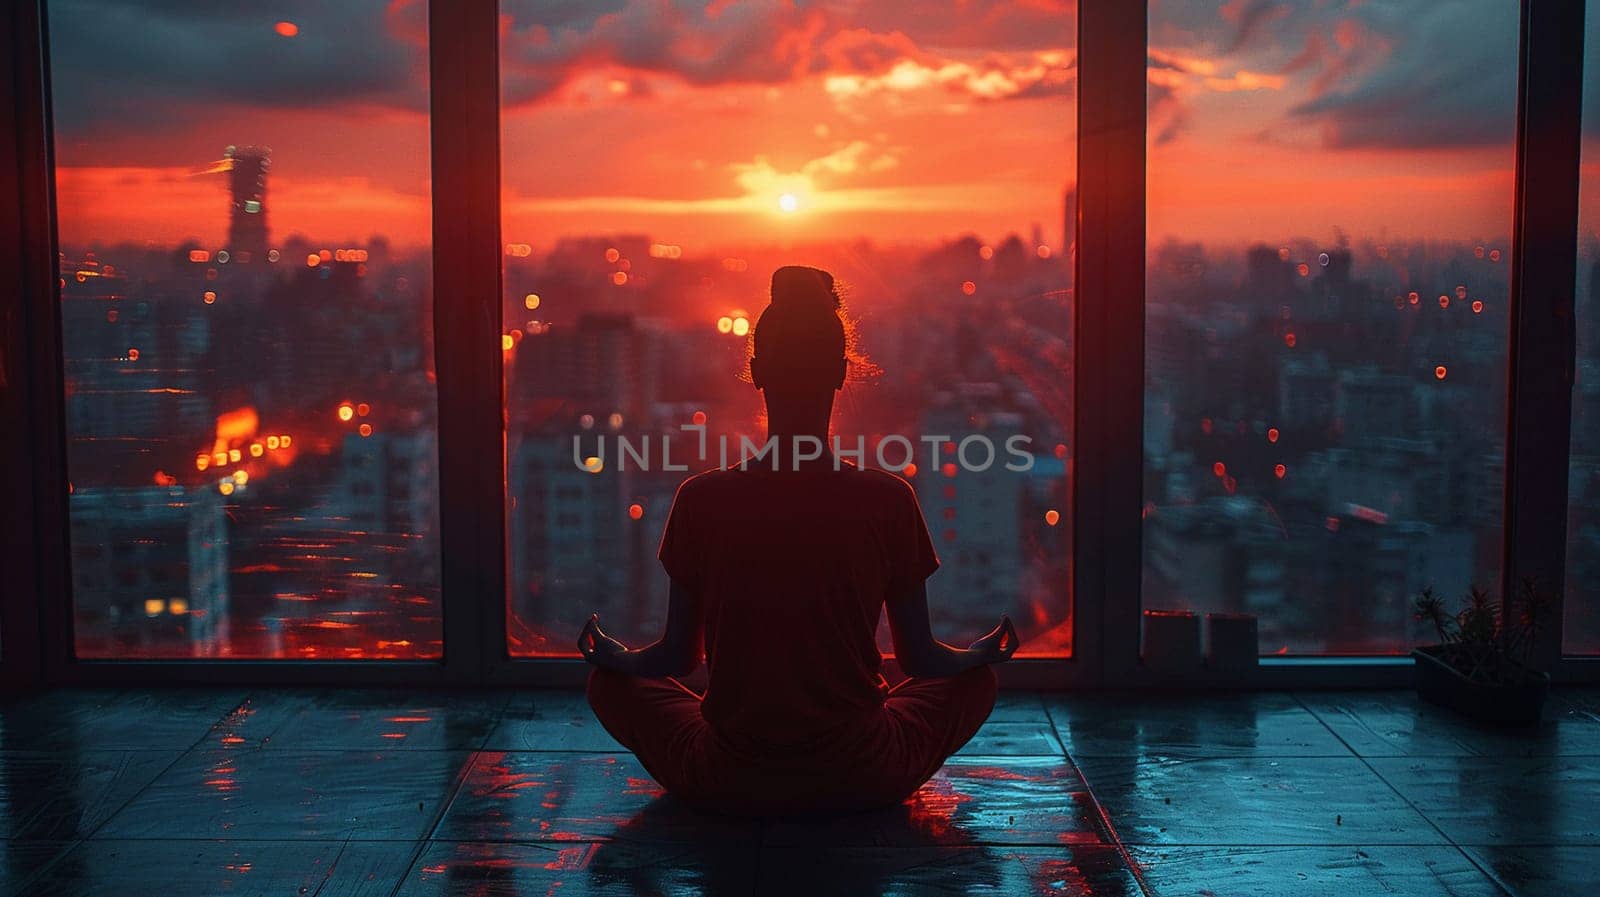 Conceptual photo of person meditating in urban setting to represent World Sleep Day.